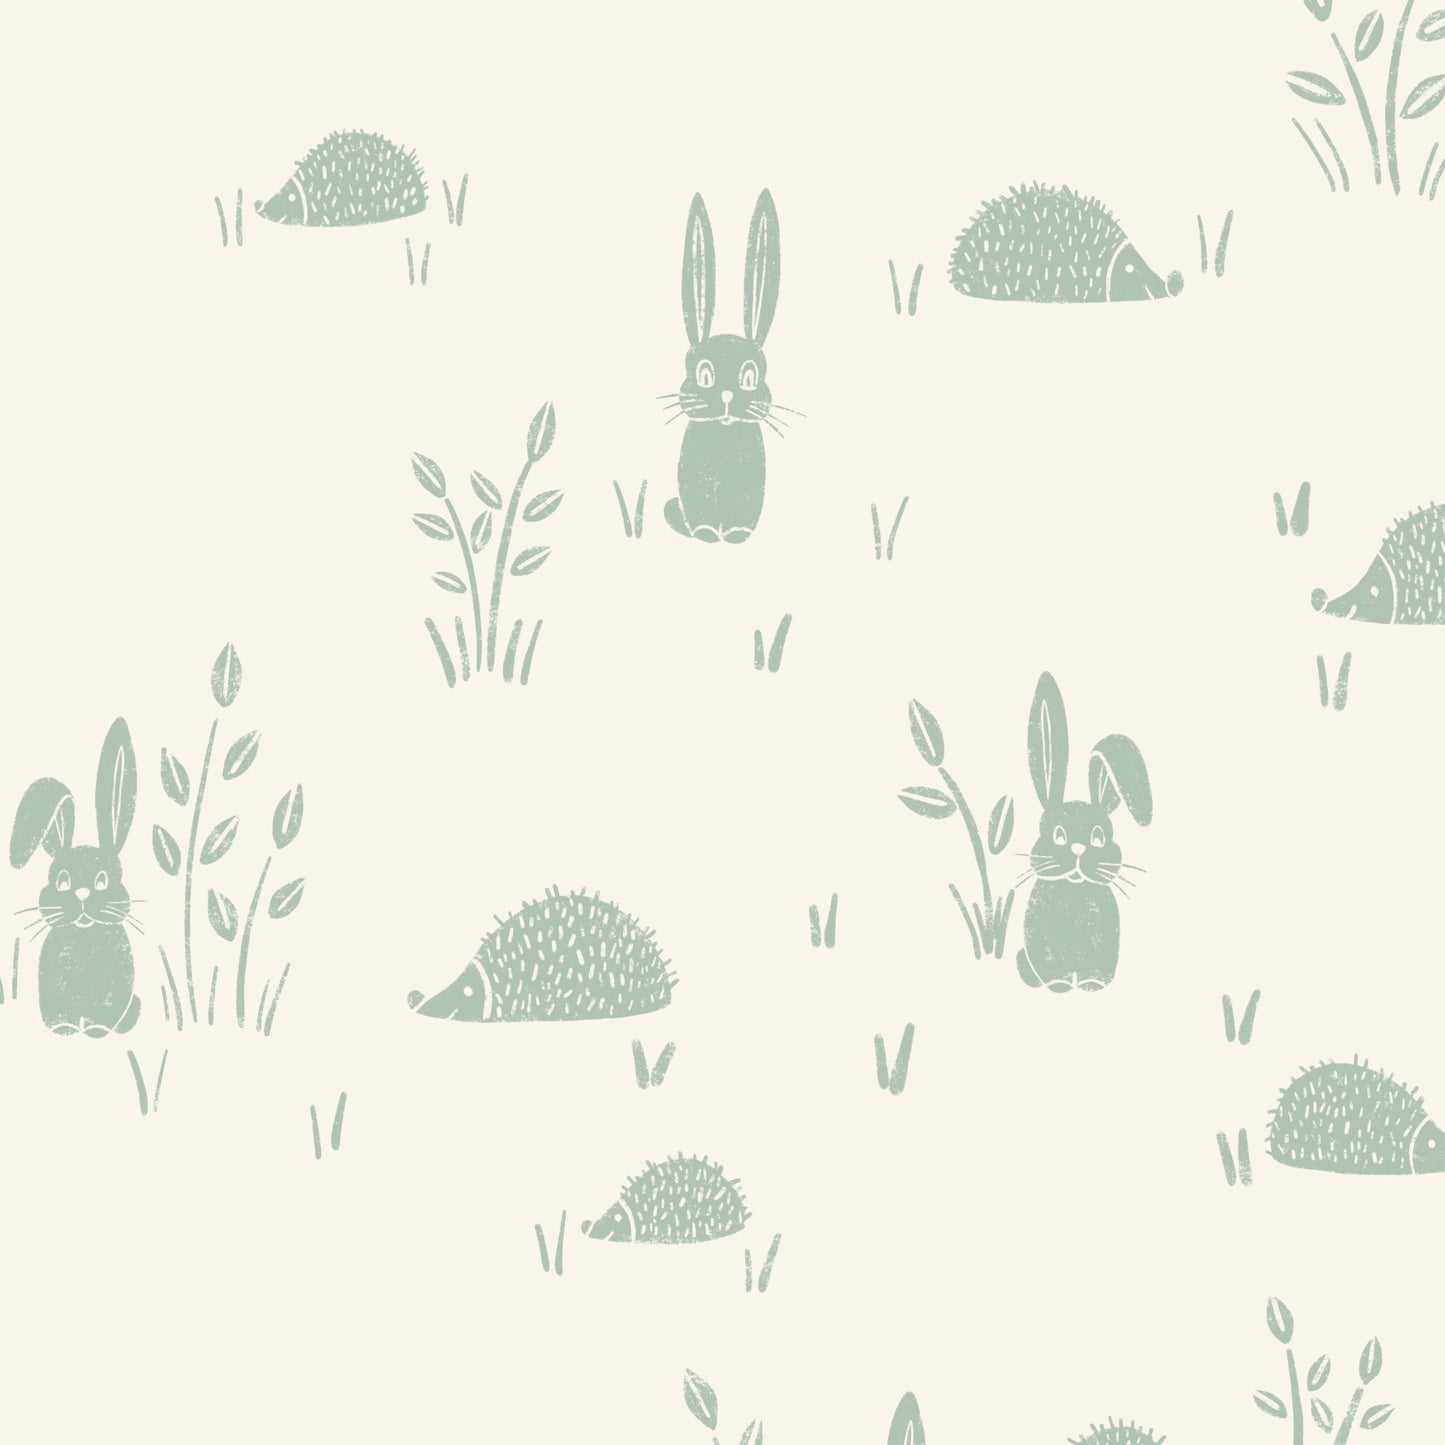 Hedgehogs and Rabbits Wallpaper in Sea Green shown in a close up view.